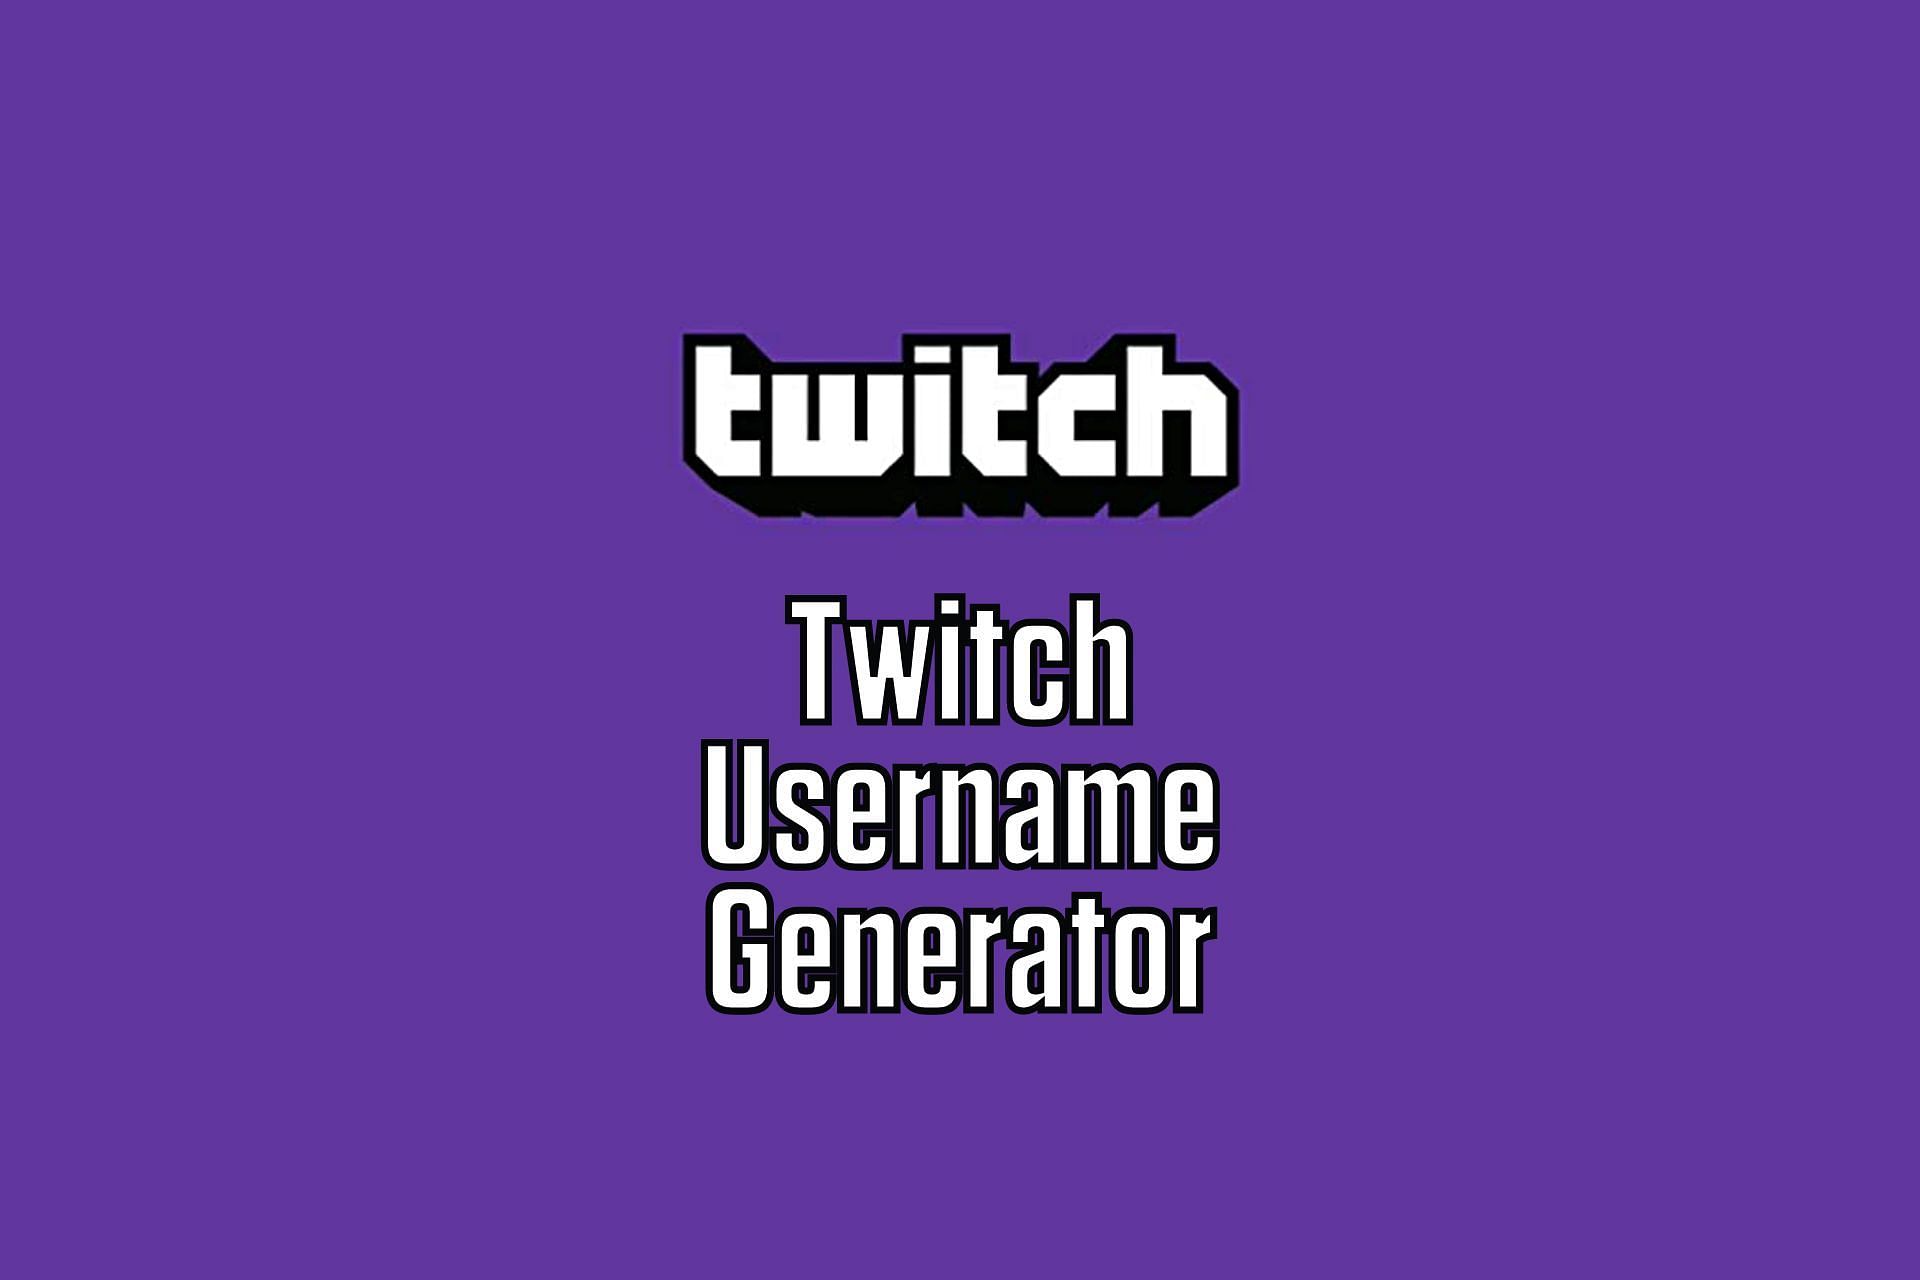 Twitch username generator: to get creative usernames for your Twitch account